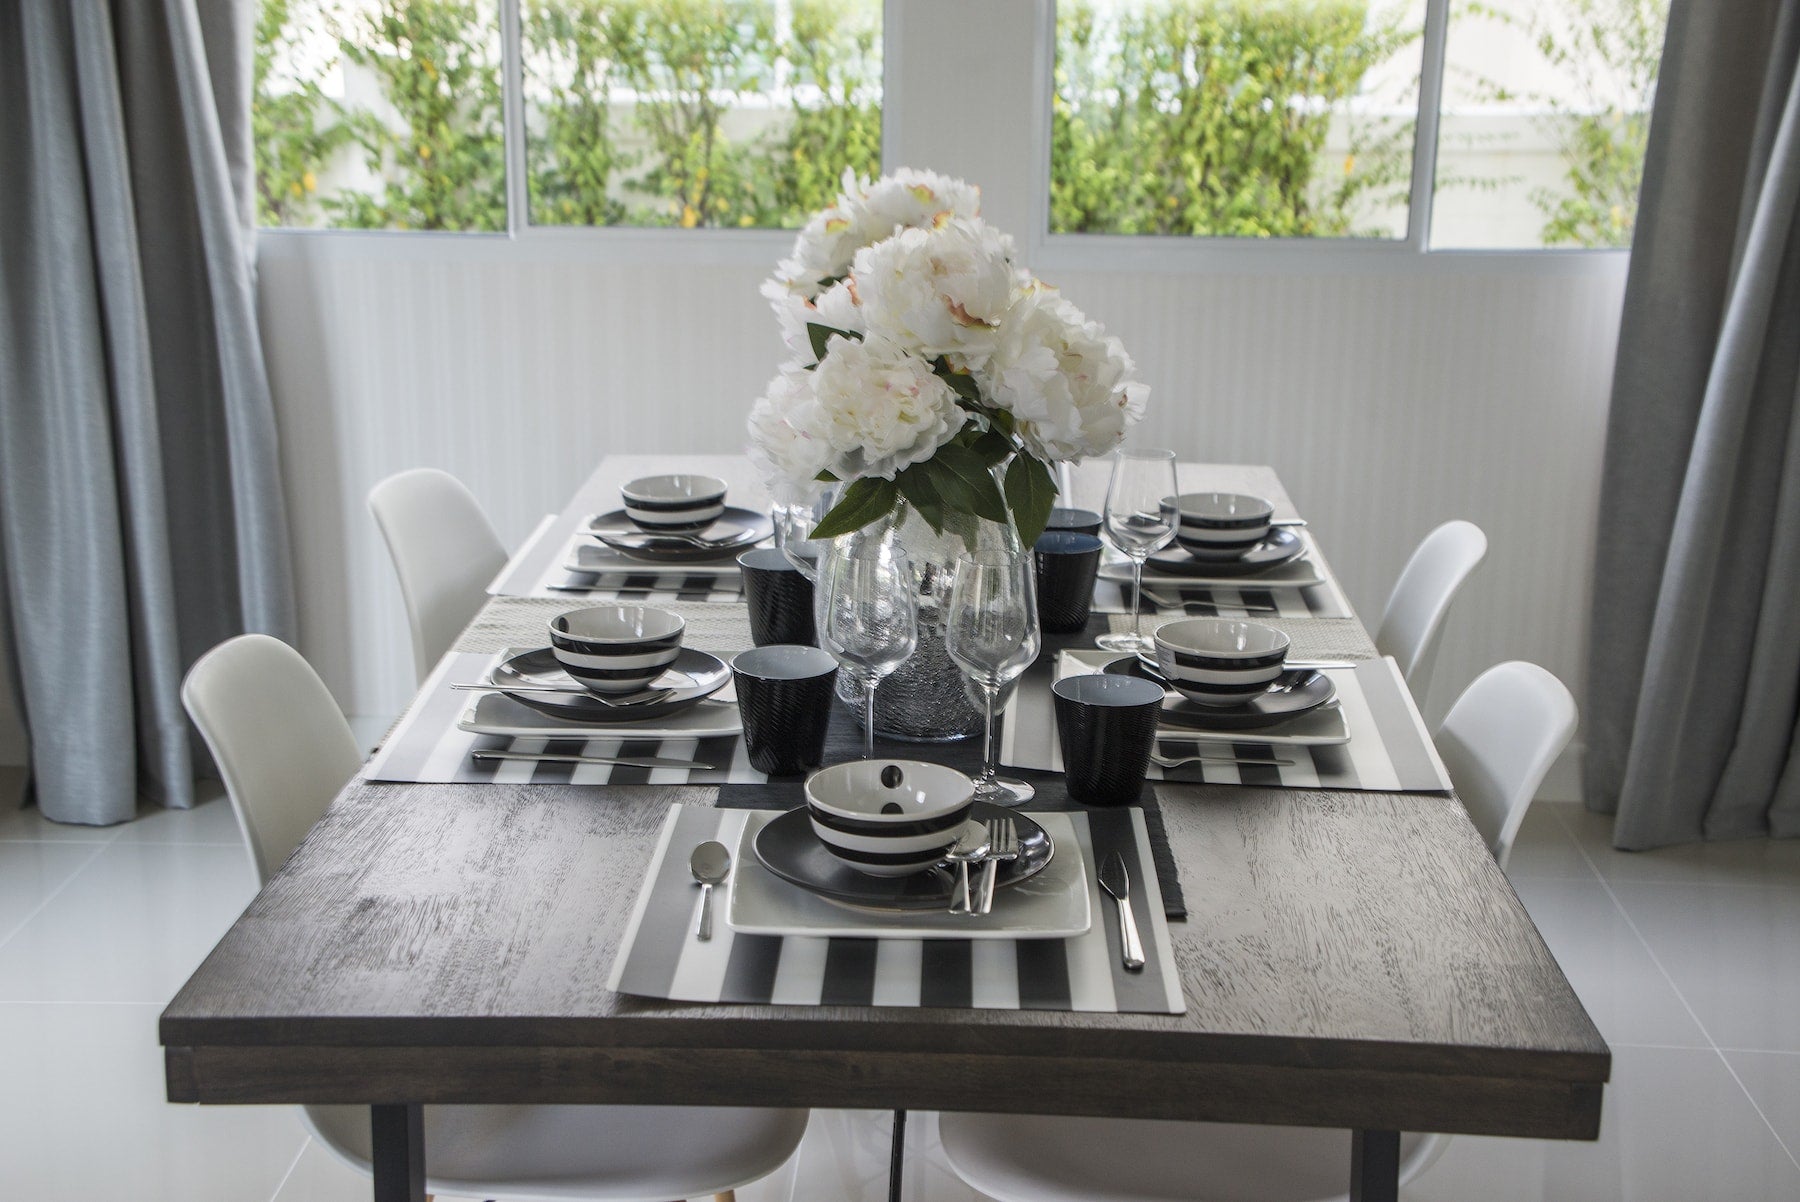 Five Secrets to Creating a Modern and Wow-worthy Tablescape